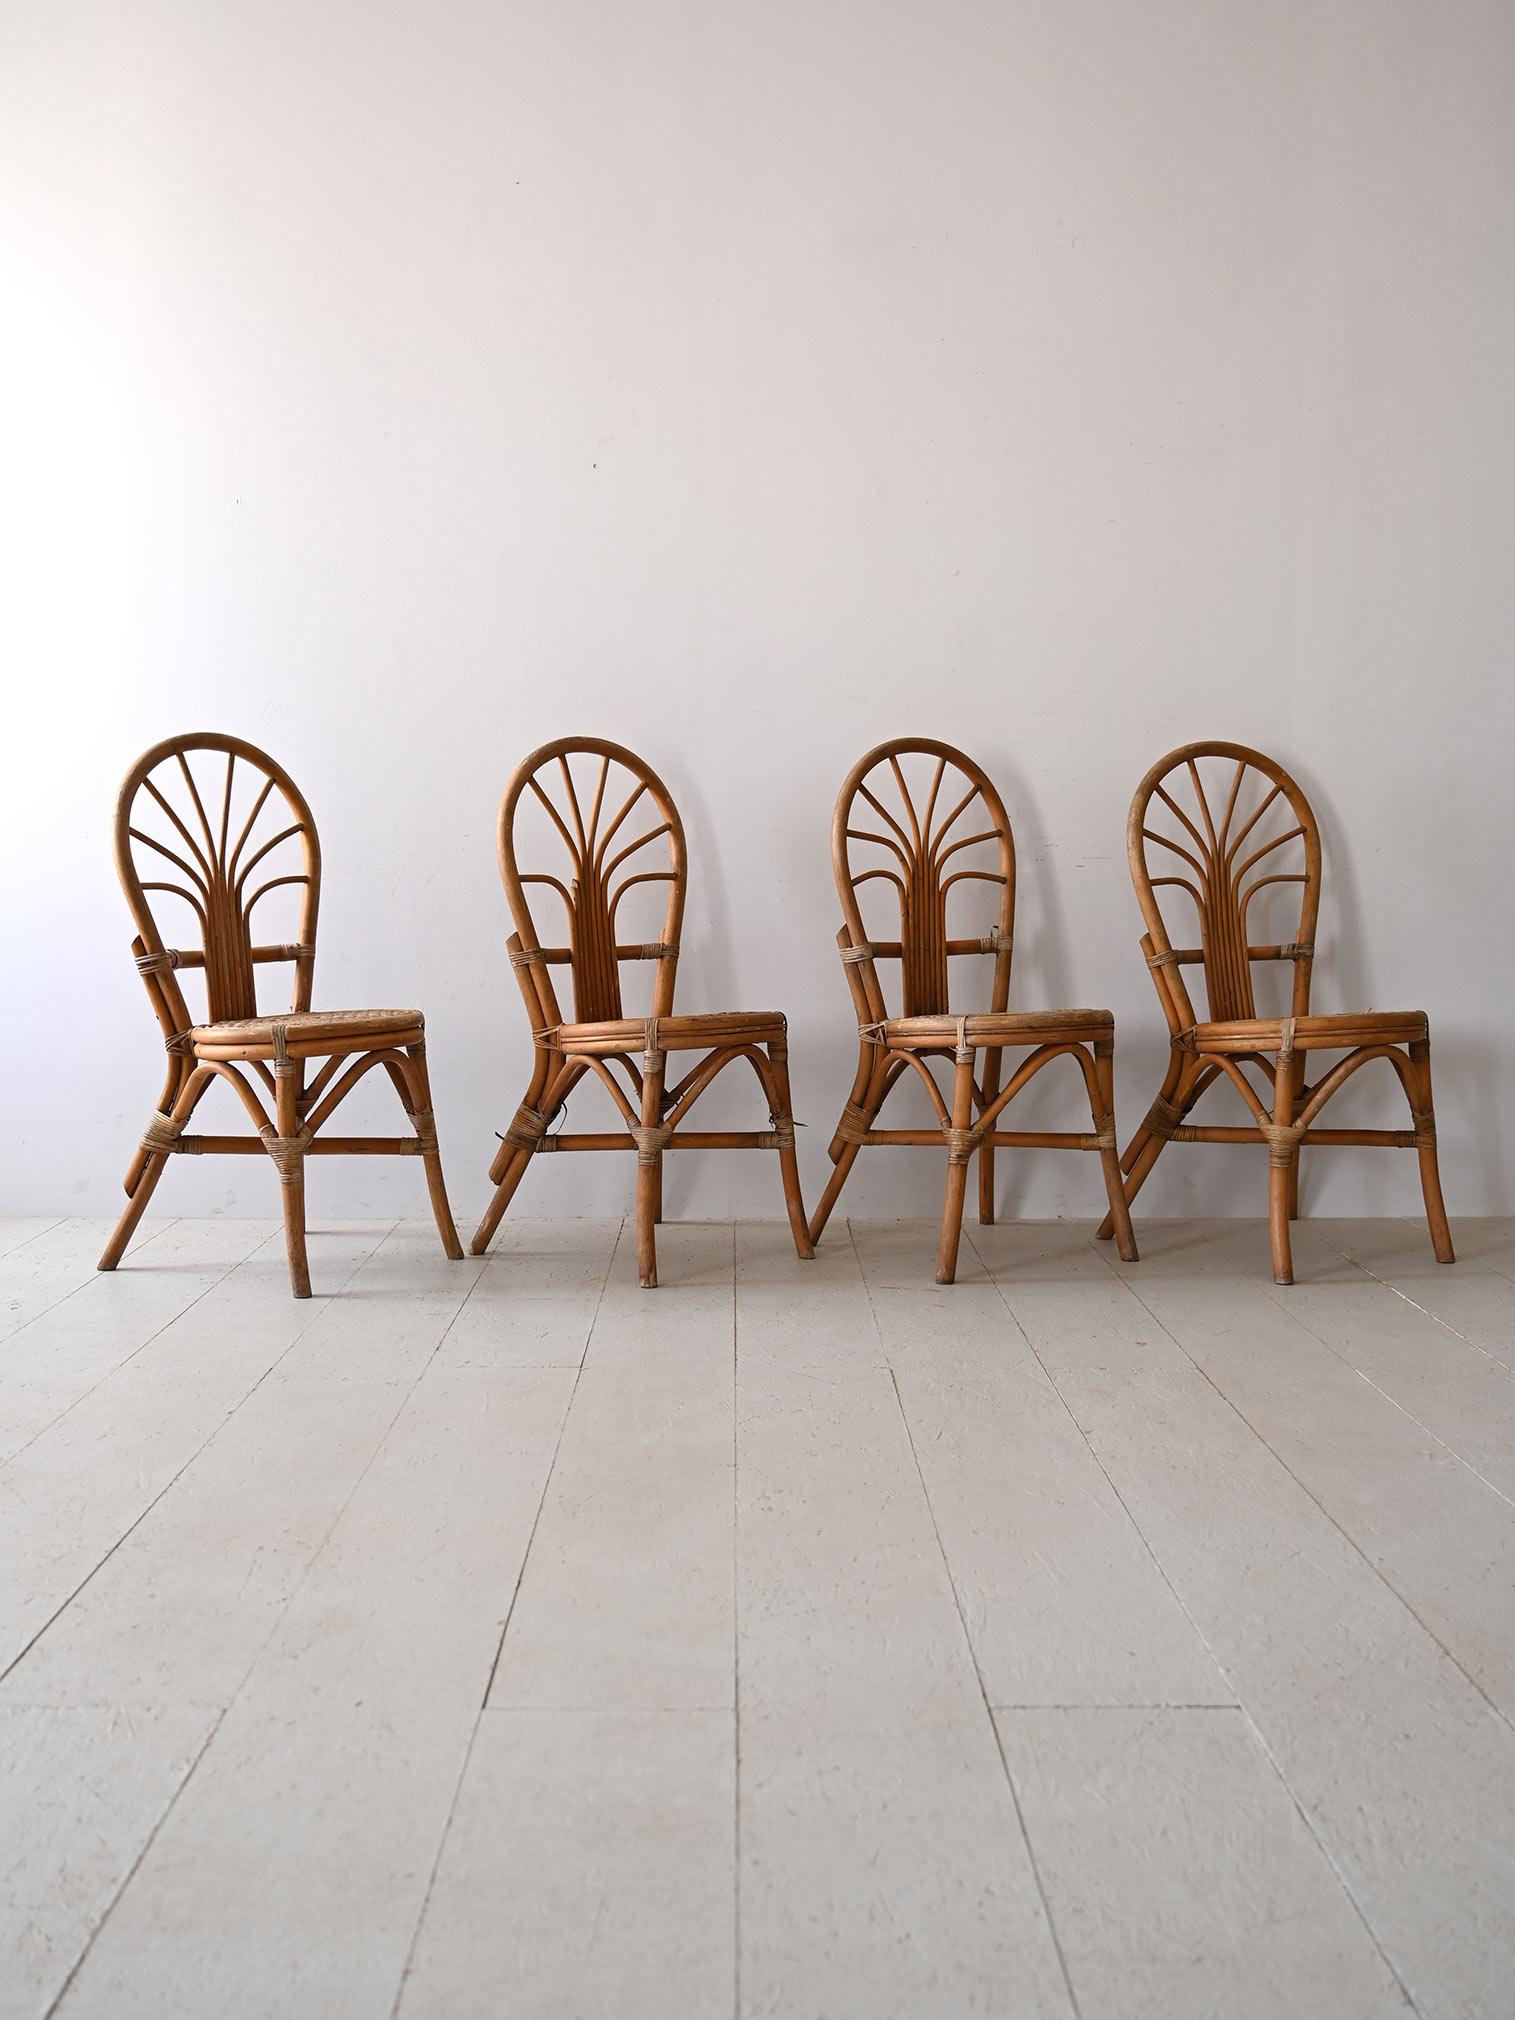 Set of four vintage chairs made of bamboo, embodying the elegance and charm of natural furniture.

The chairs feature soft, curvy shapes that give them a cozy and comfortable look. The round seat and upturned U-shaped backrest are both made from